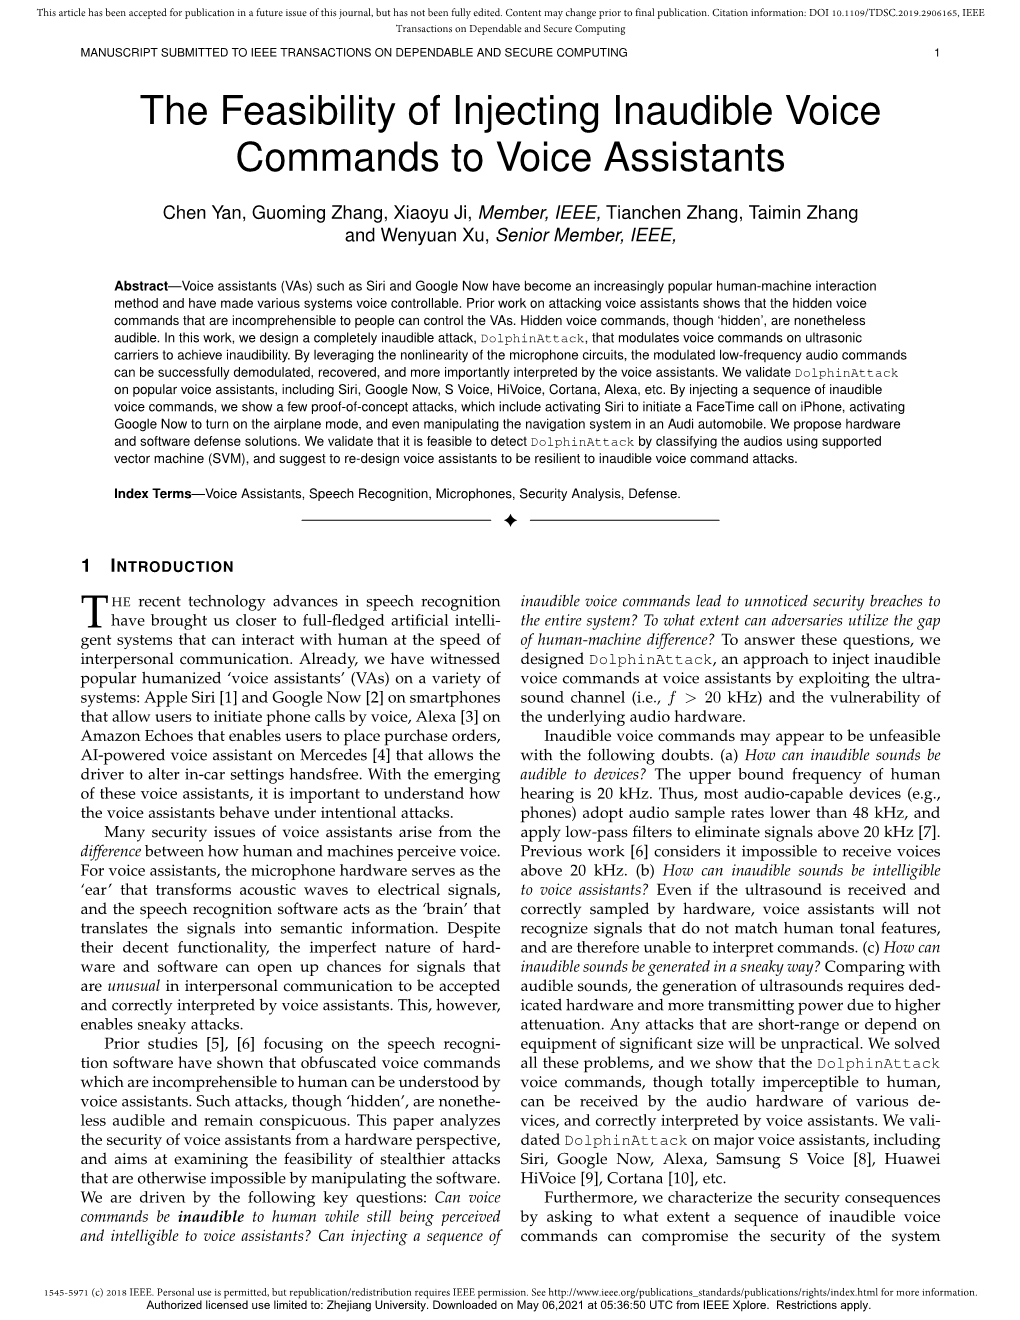 The Feasibility of Injecting Inaudible Voice Commands to Voice Assistants